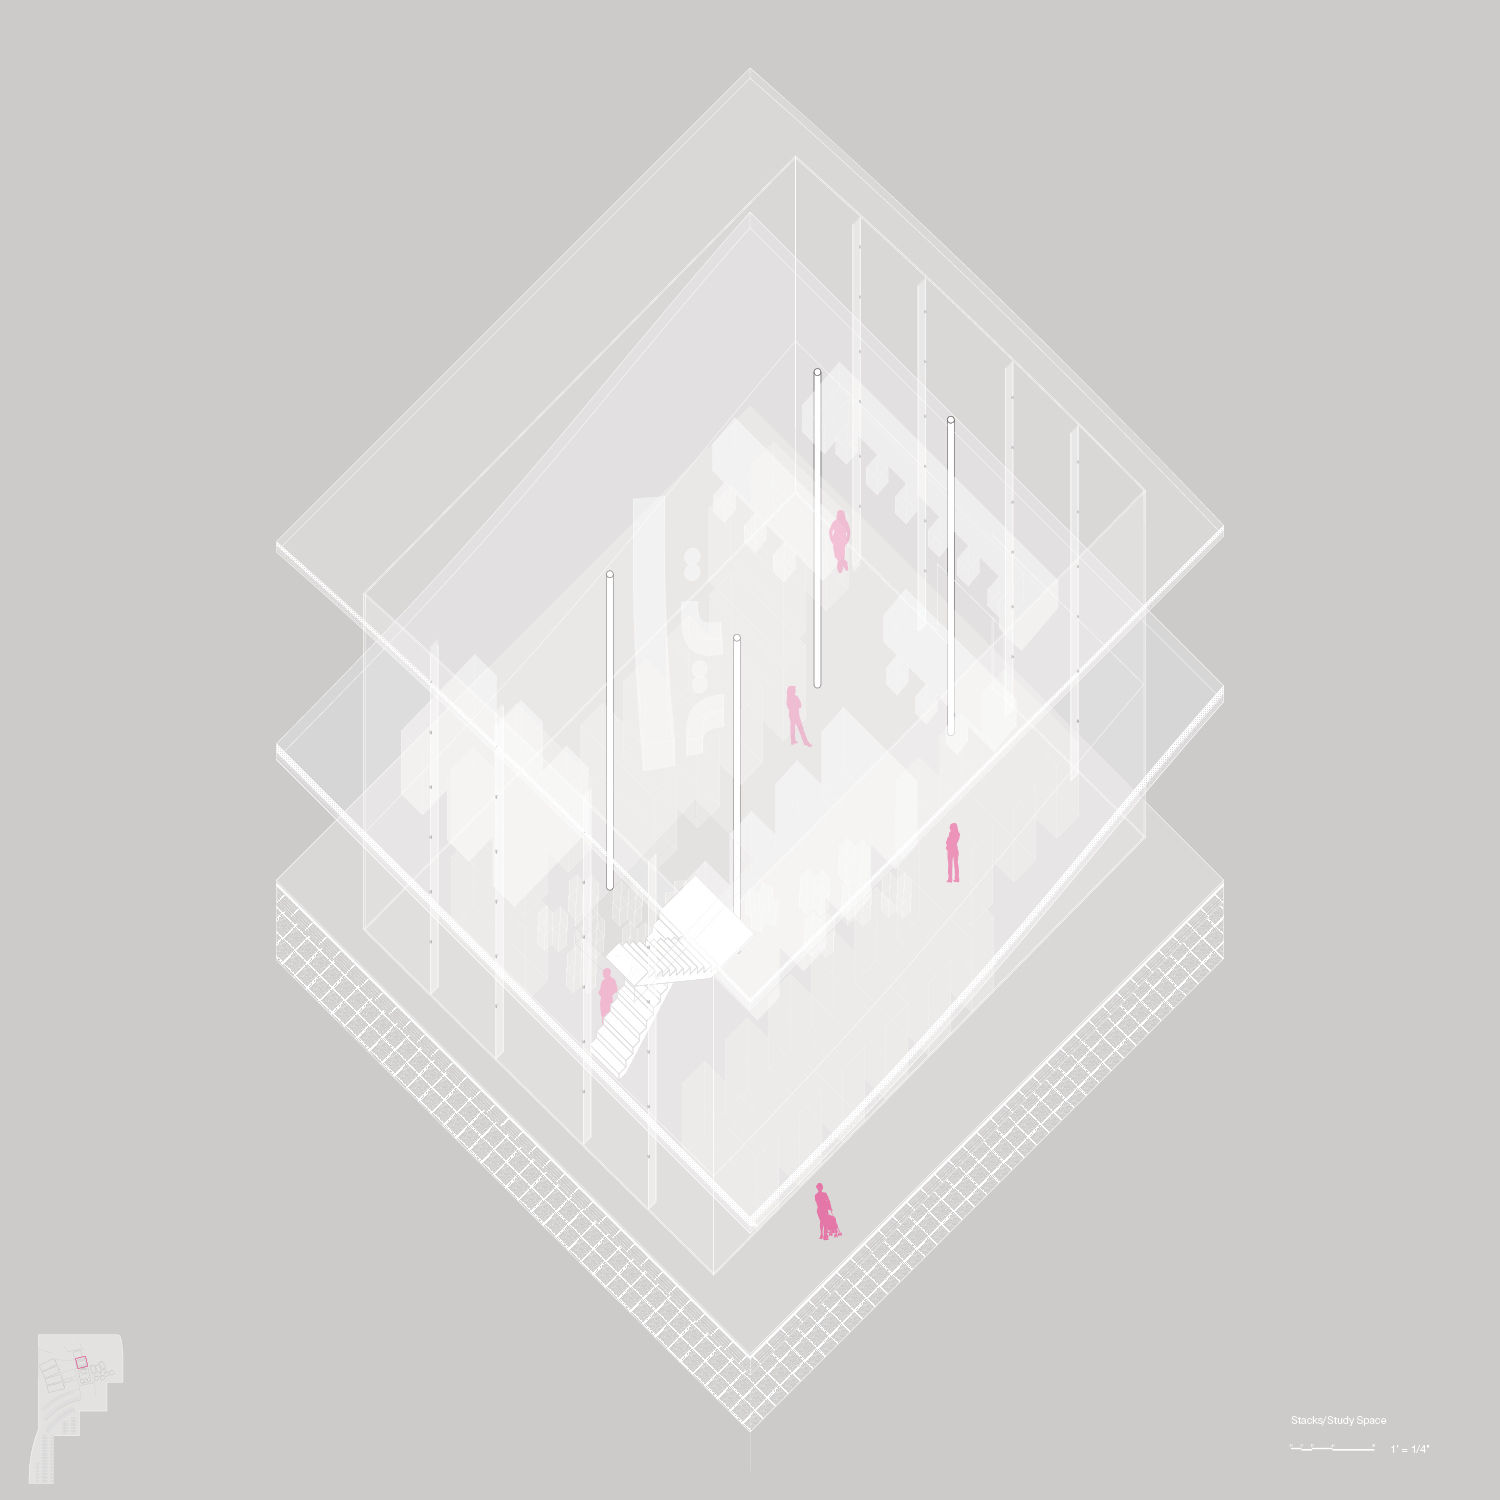 Isometric square layers of building floor plan.